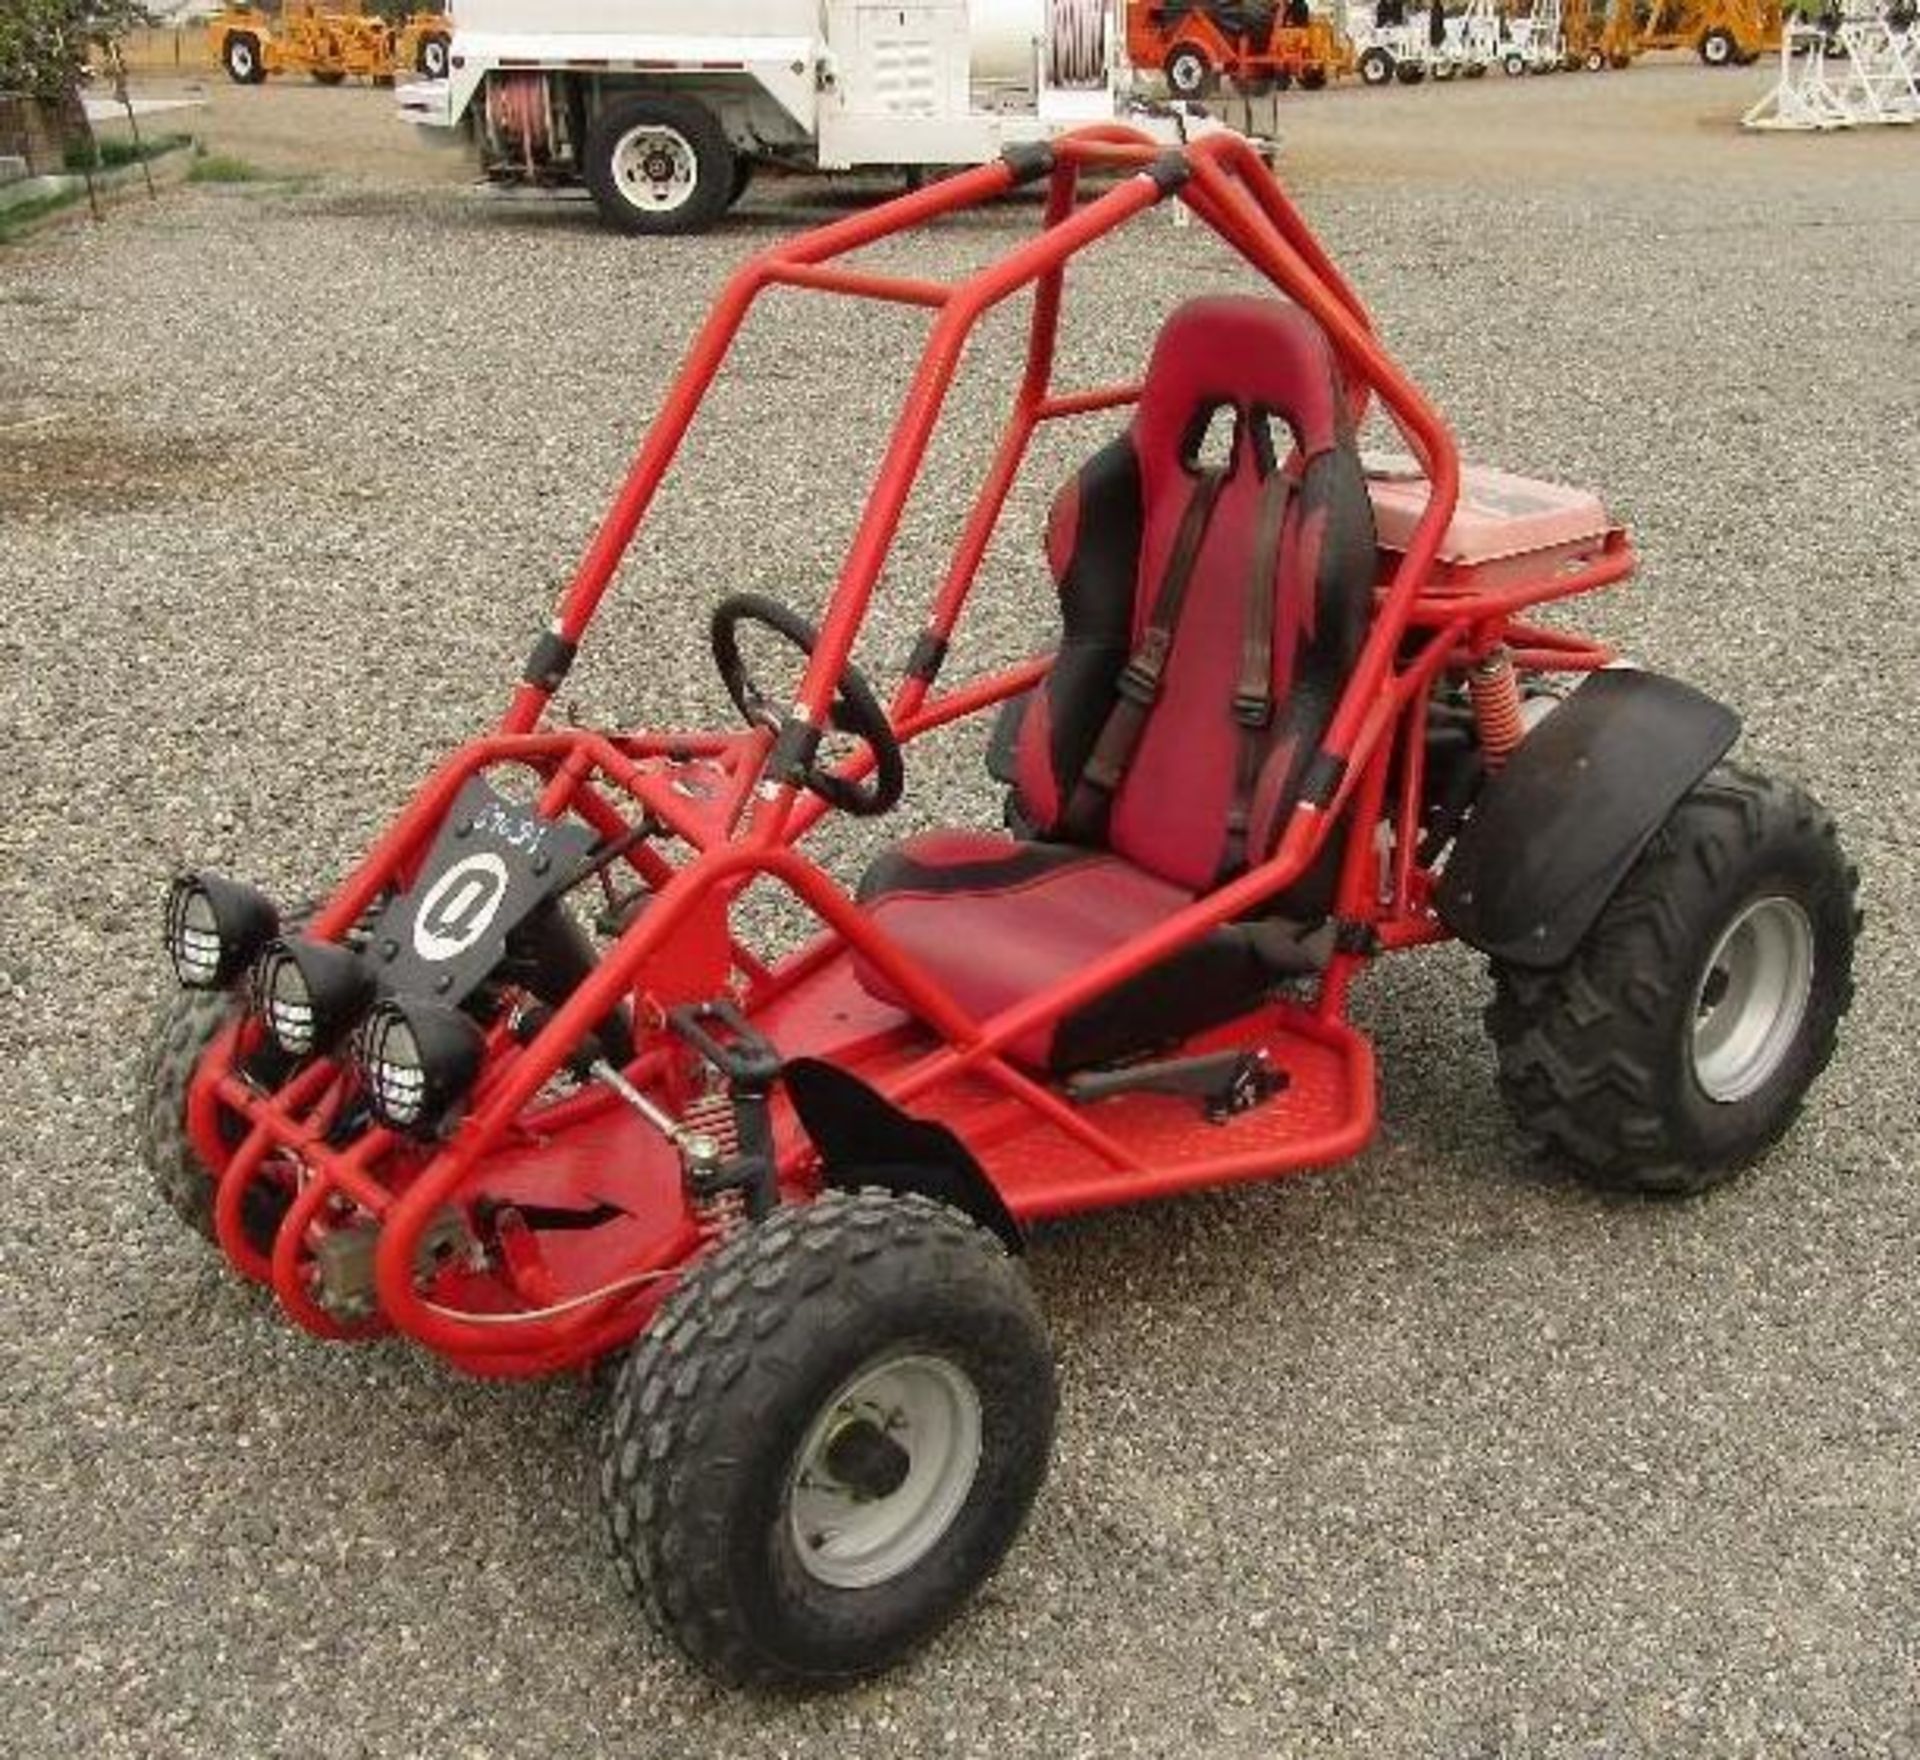 Electric start, single cylinder motor. One seat.  Headlights Forward and reverse. Runs, drives and